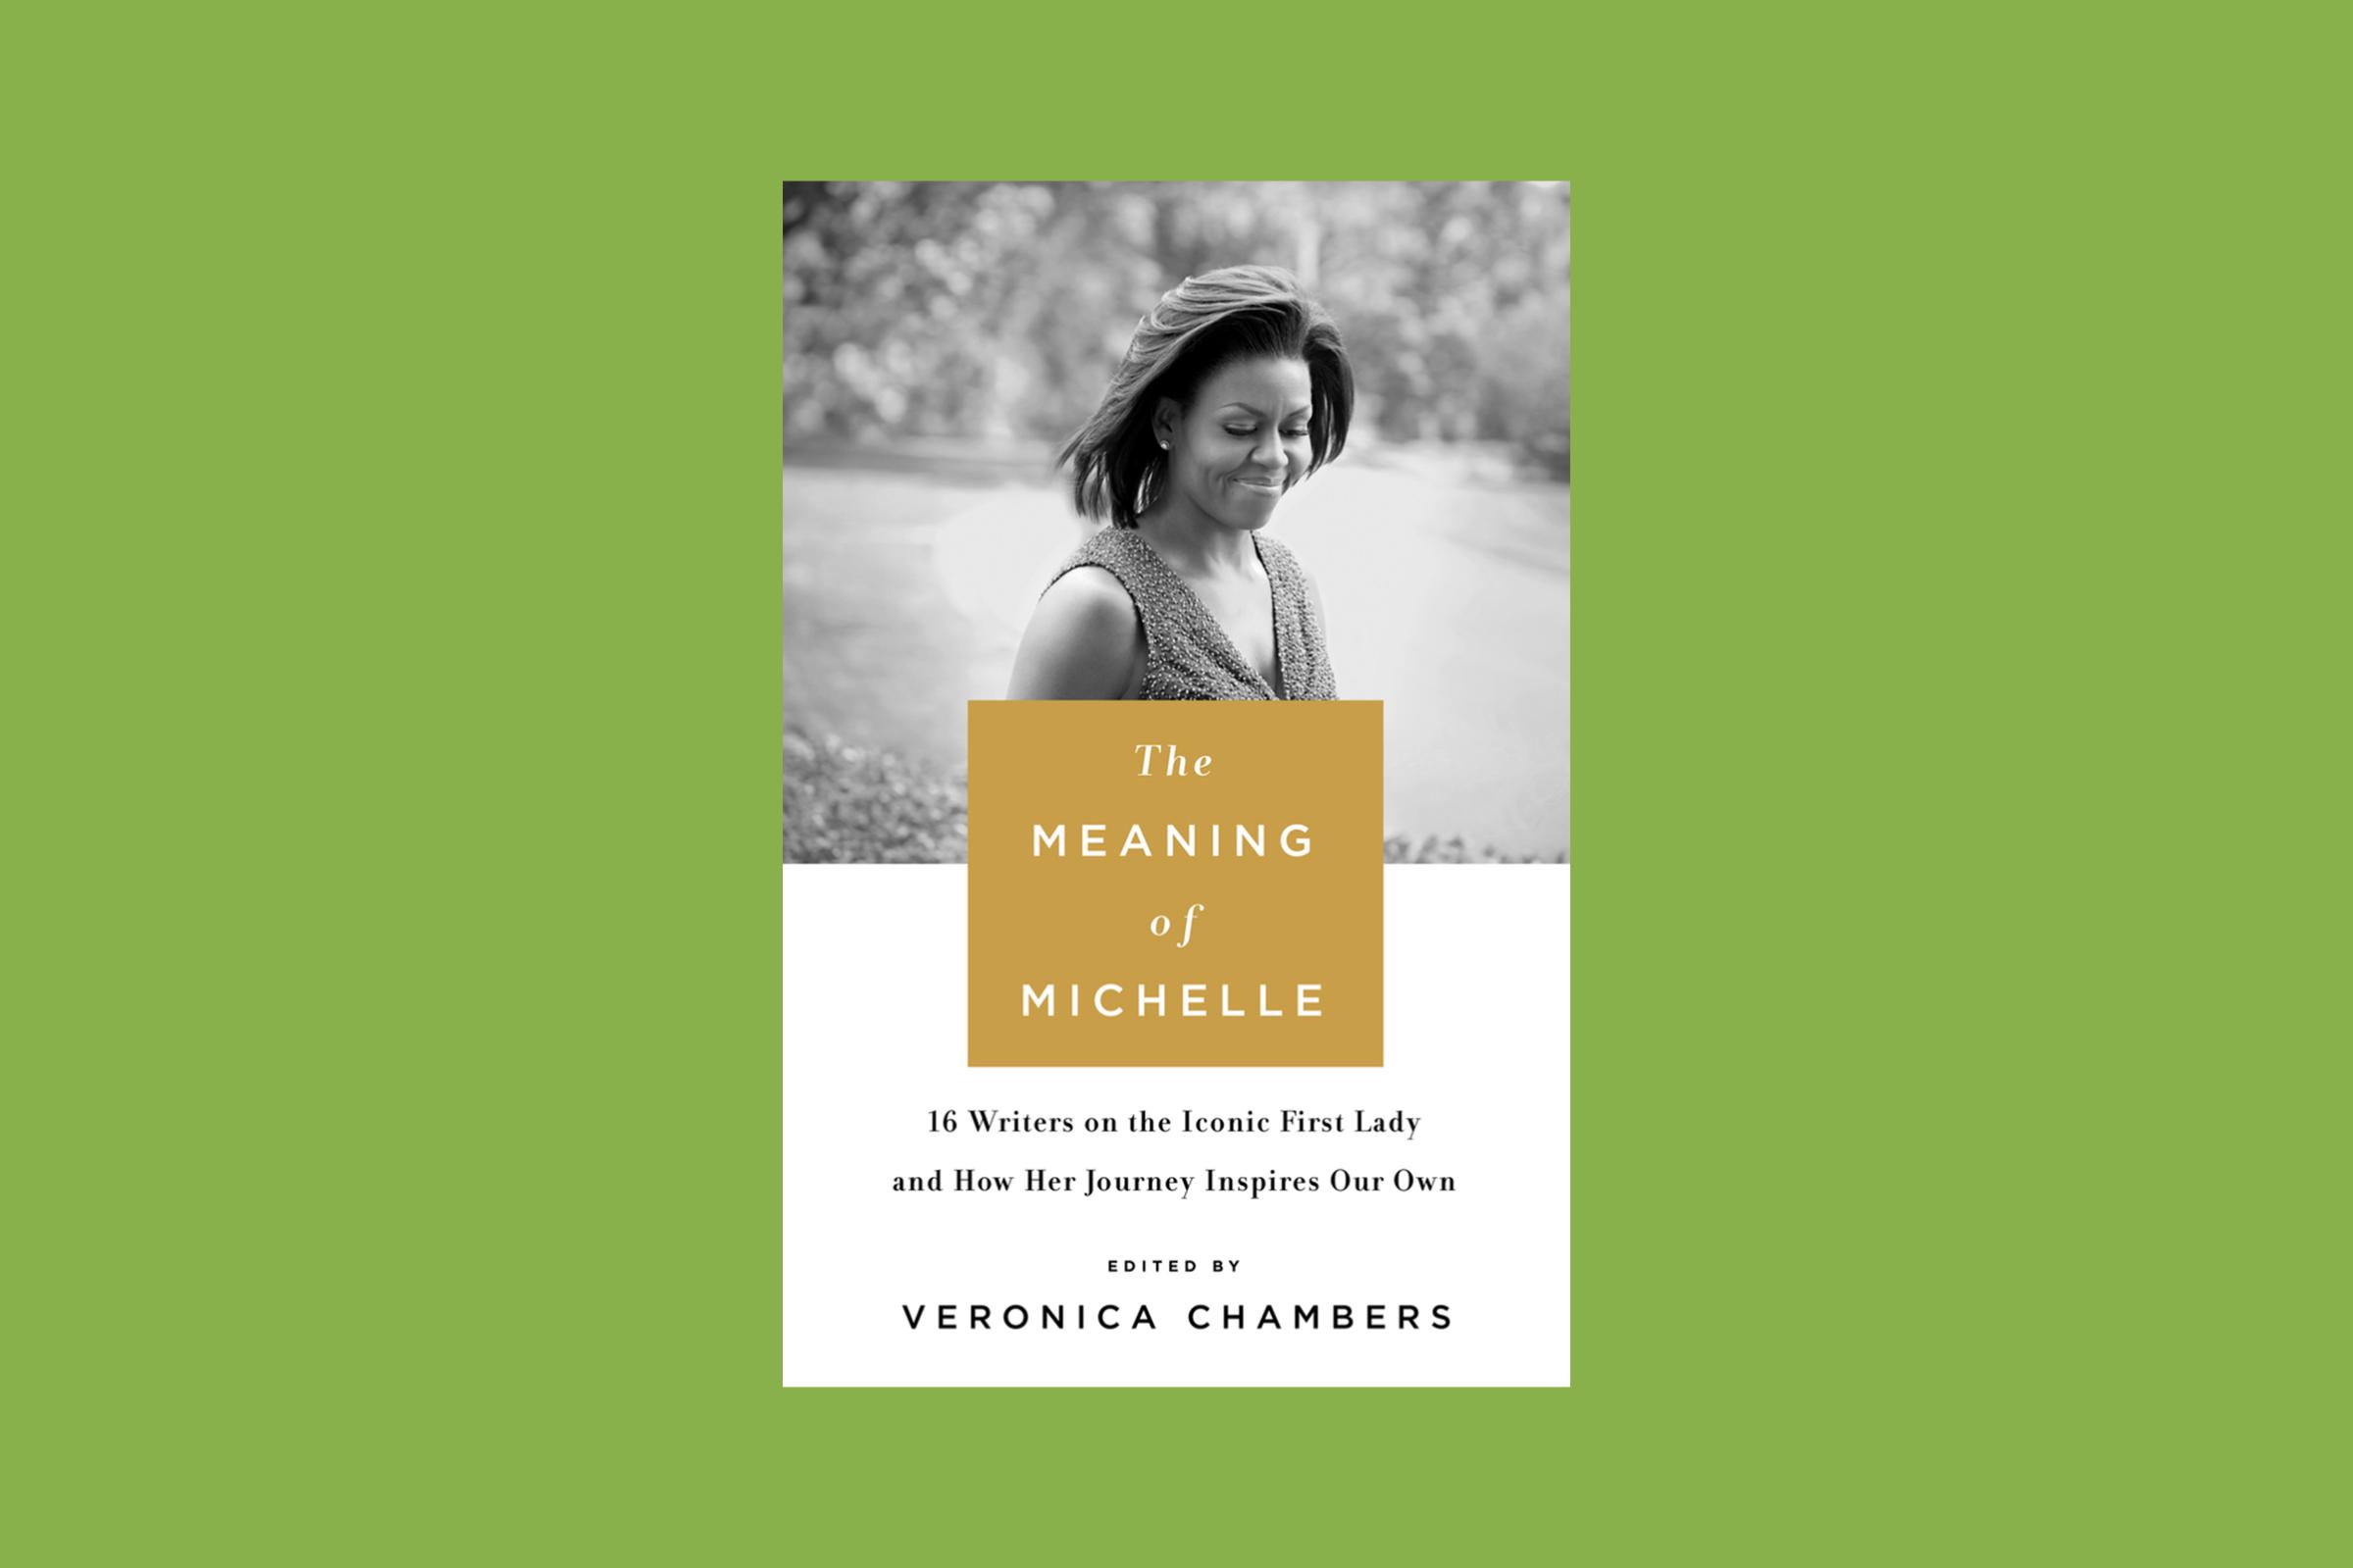 The Meaning of Michelle is one of the top 10 nonfiction books of 2017